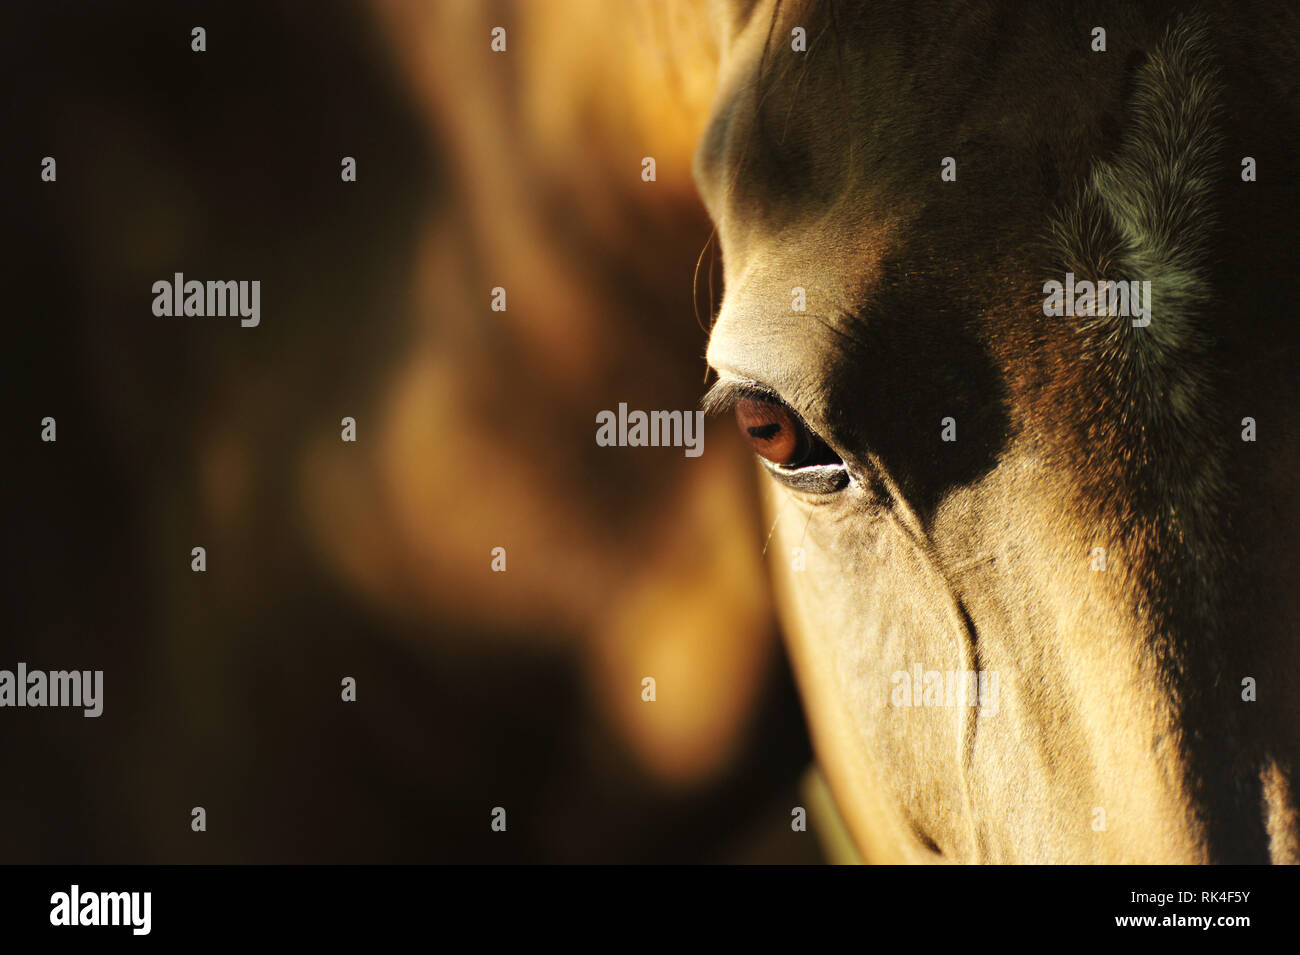 Close up of a bay horse eye and head looking into the camera in the natural sunlight. Horizontal, portrait, front view. Stock Photo